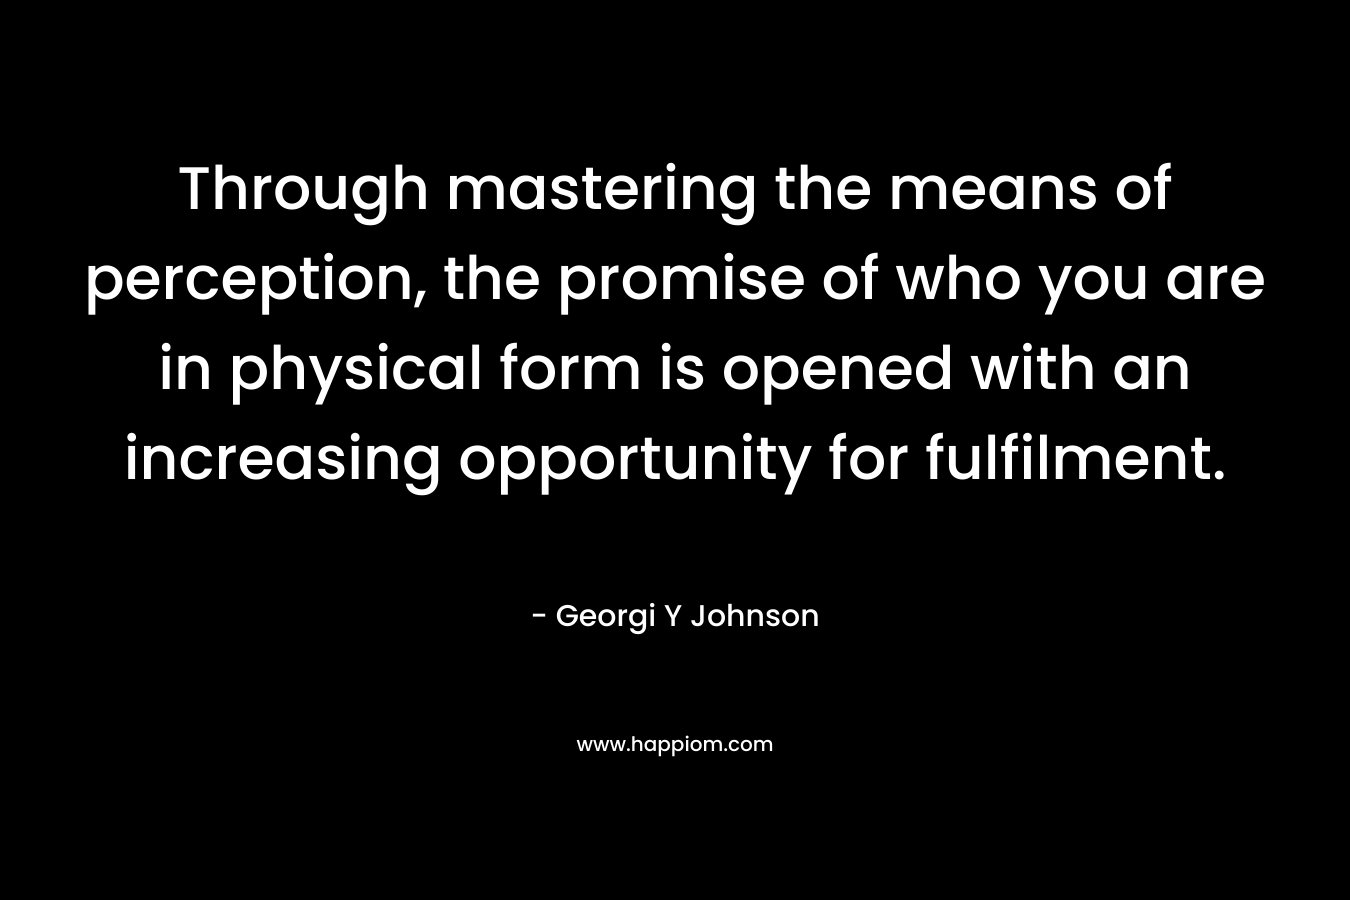 Through mastering the means of perception, the promise of who you are in physical form is opened with an increasing opportunity for fulfilment. – Georgi Y Johnson